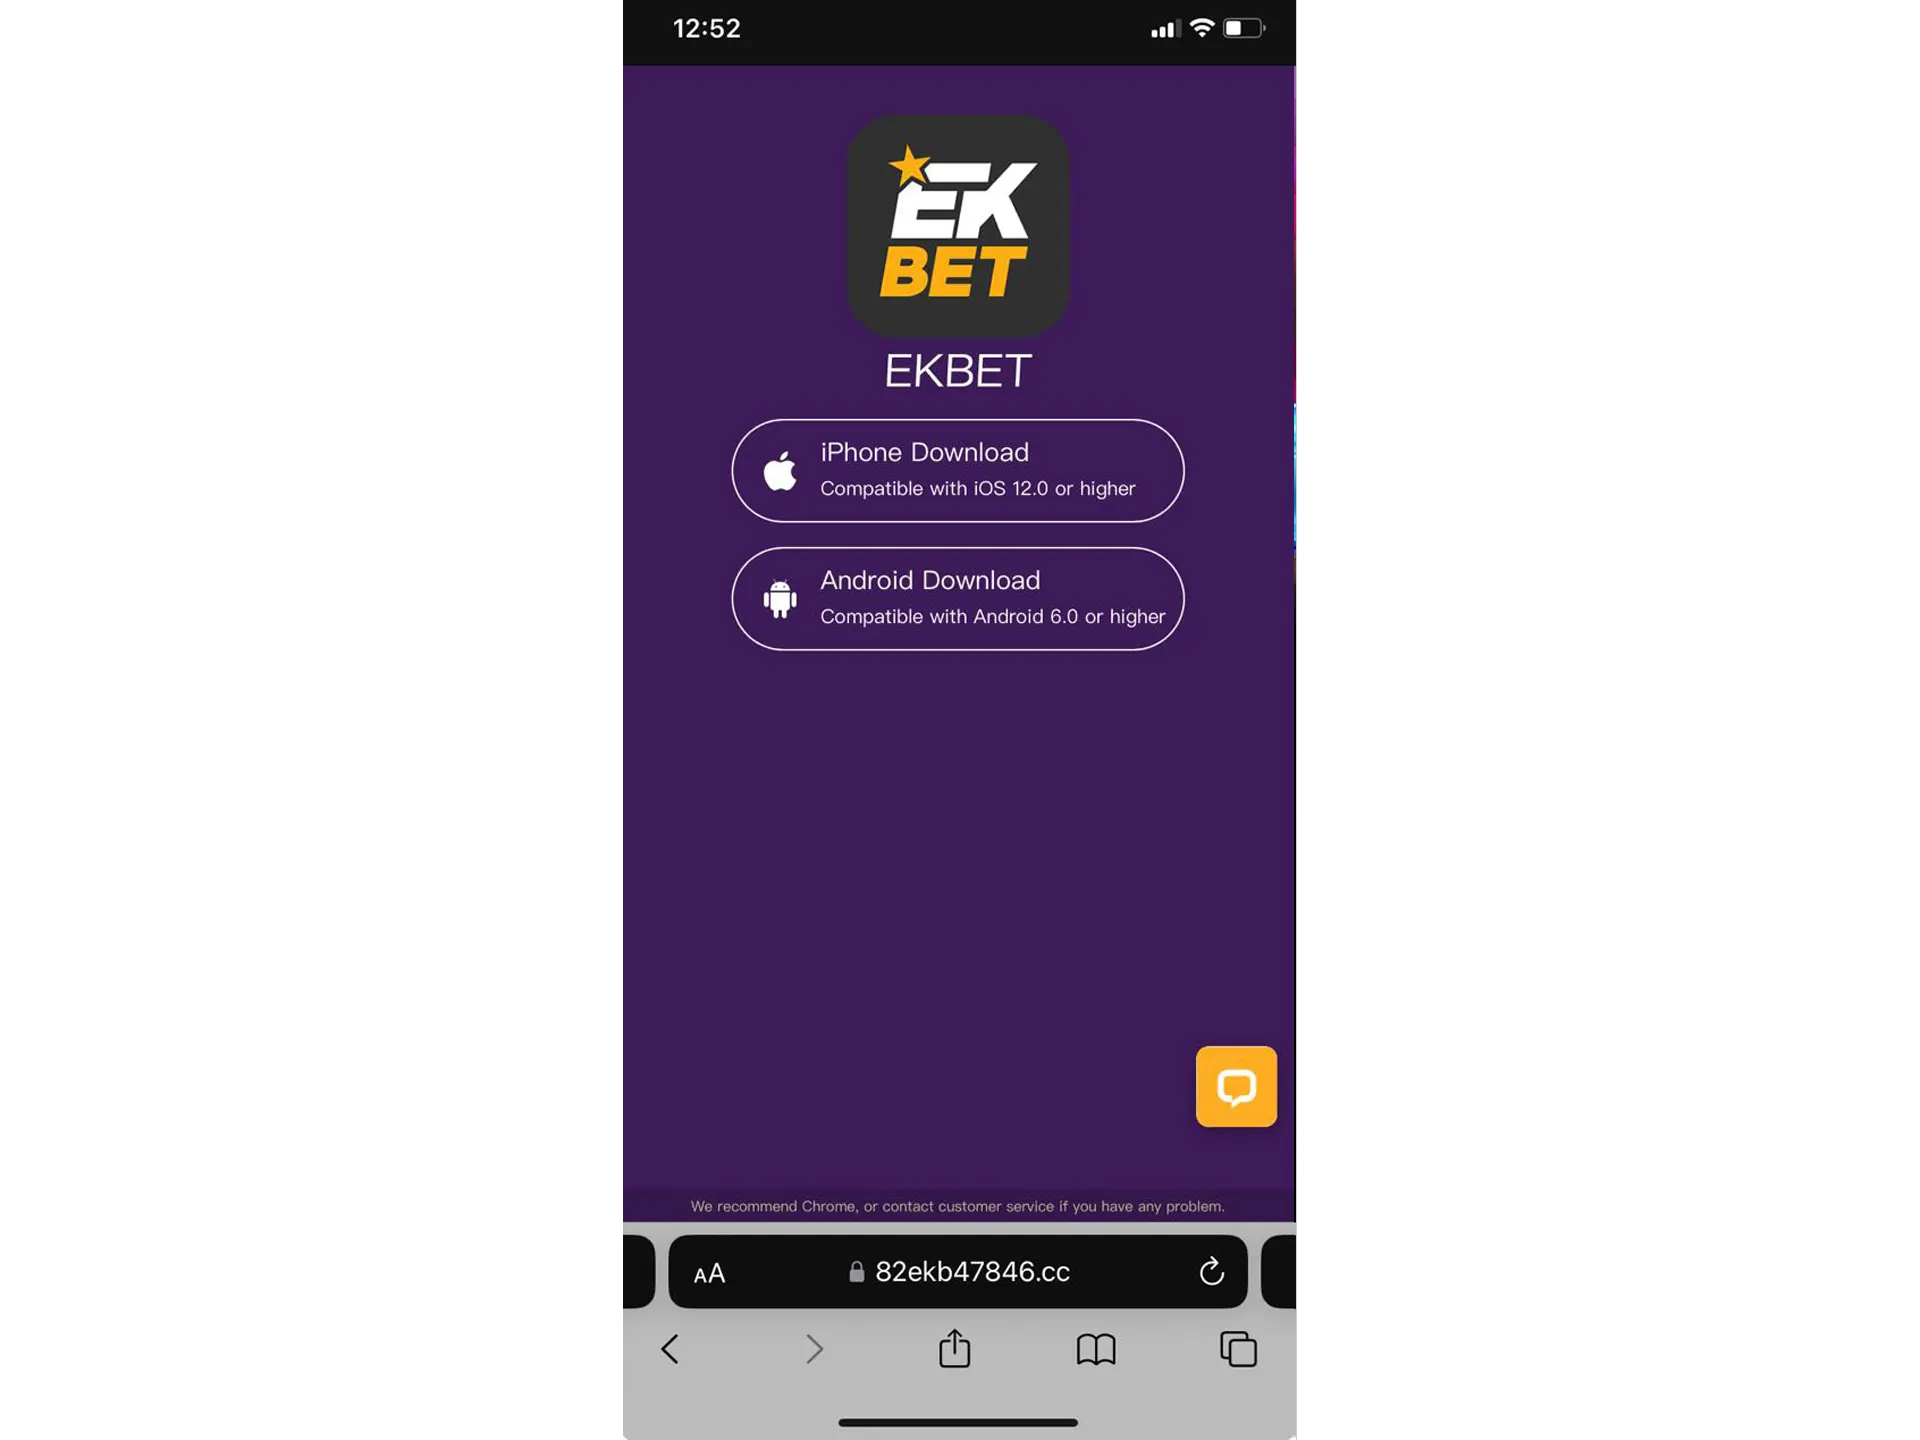 With the EKbet app, bet on sports and play in casinos.